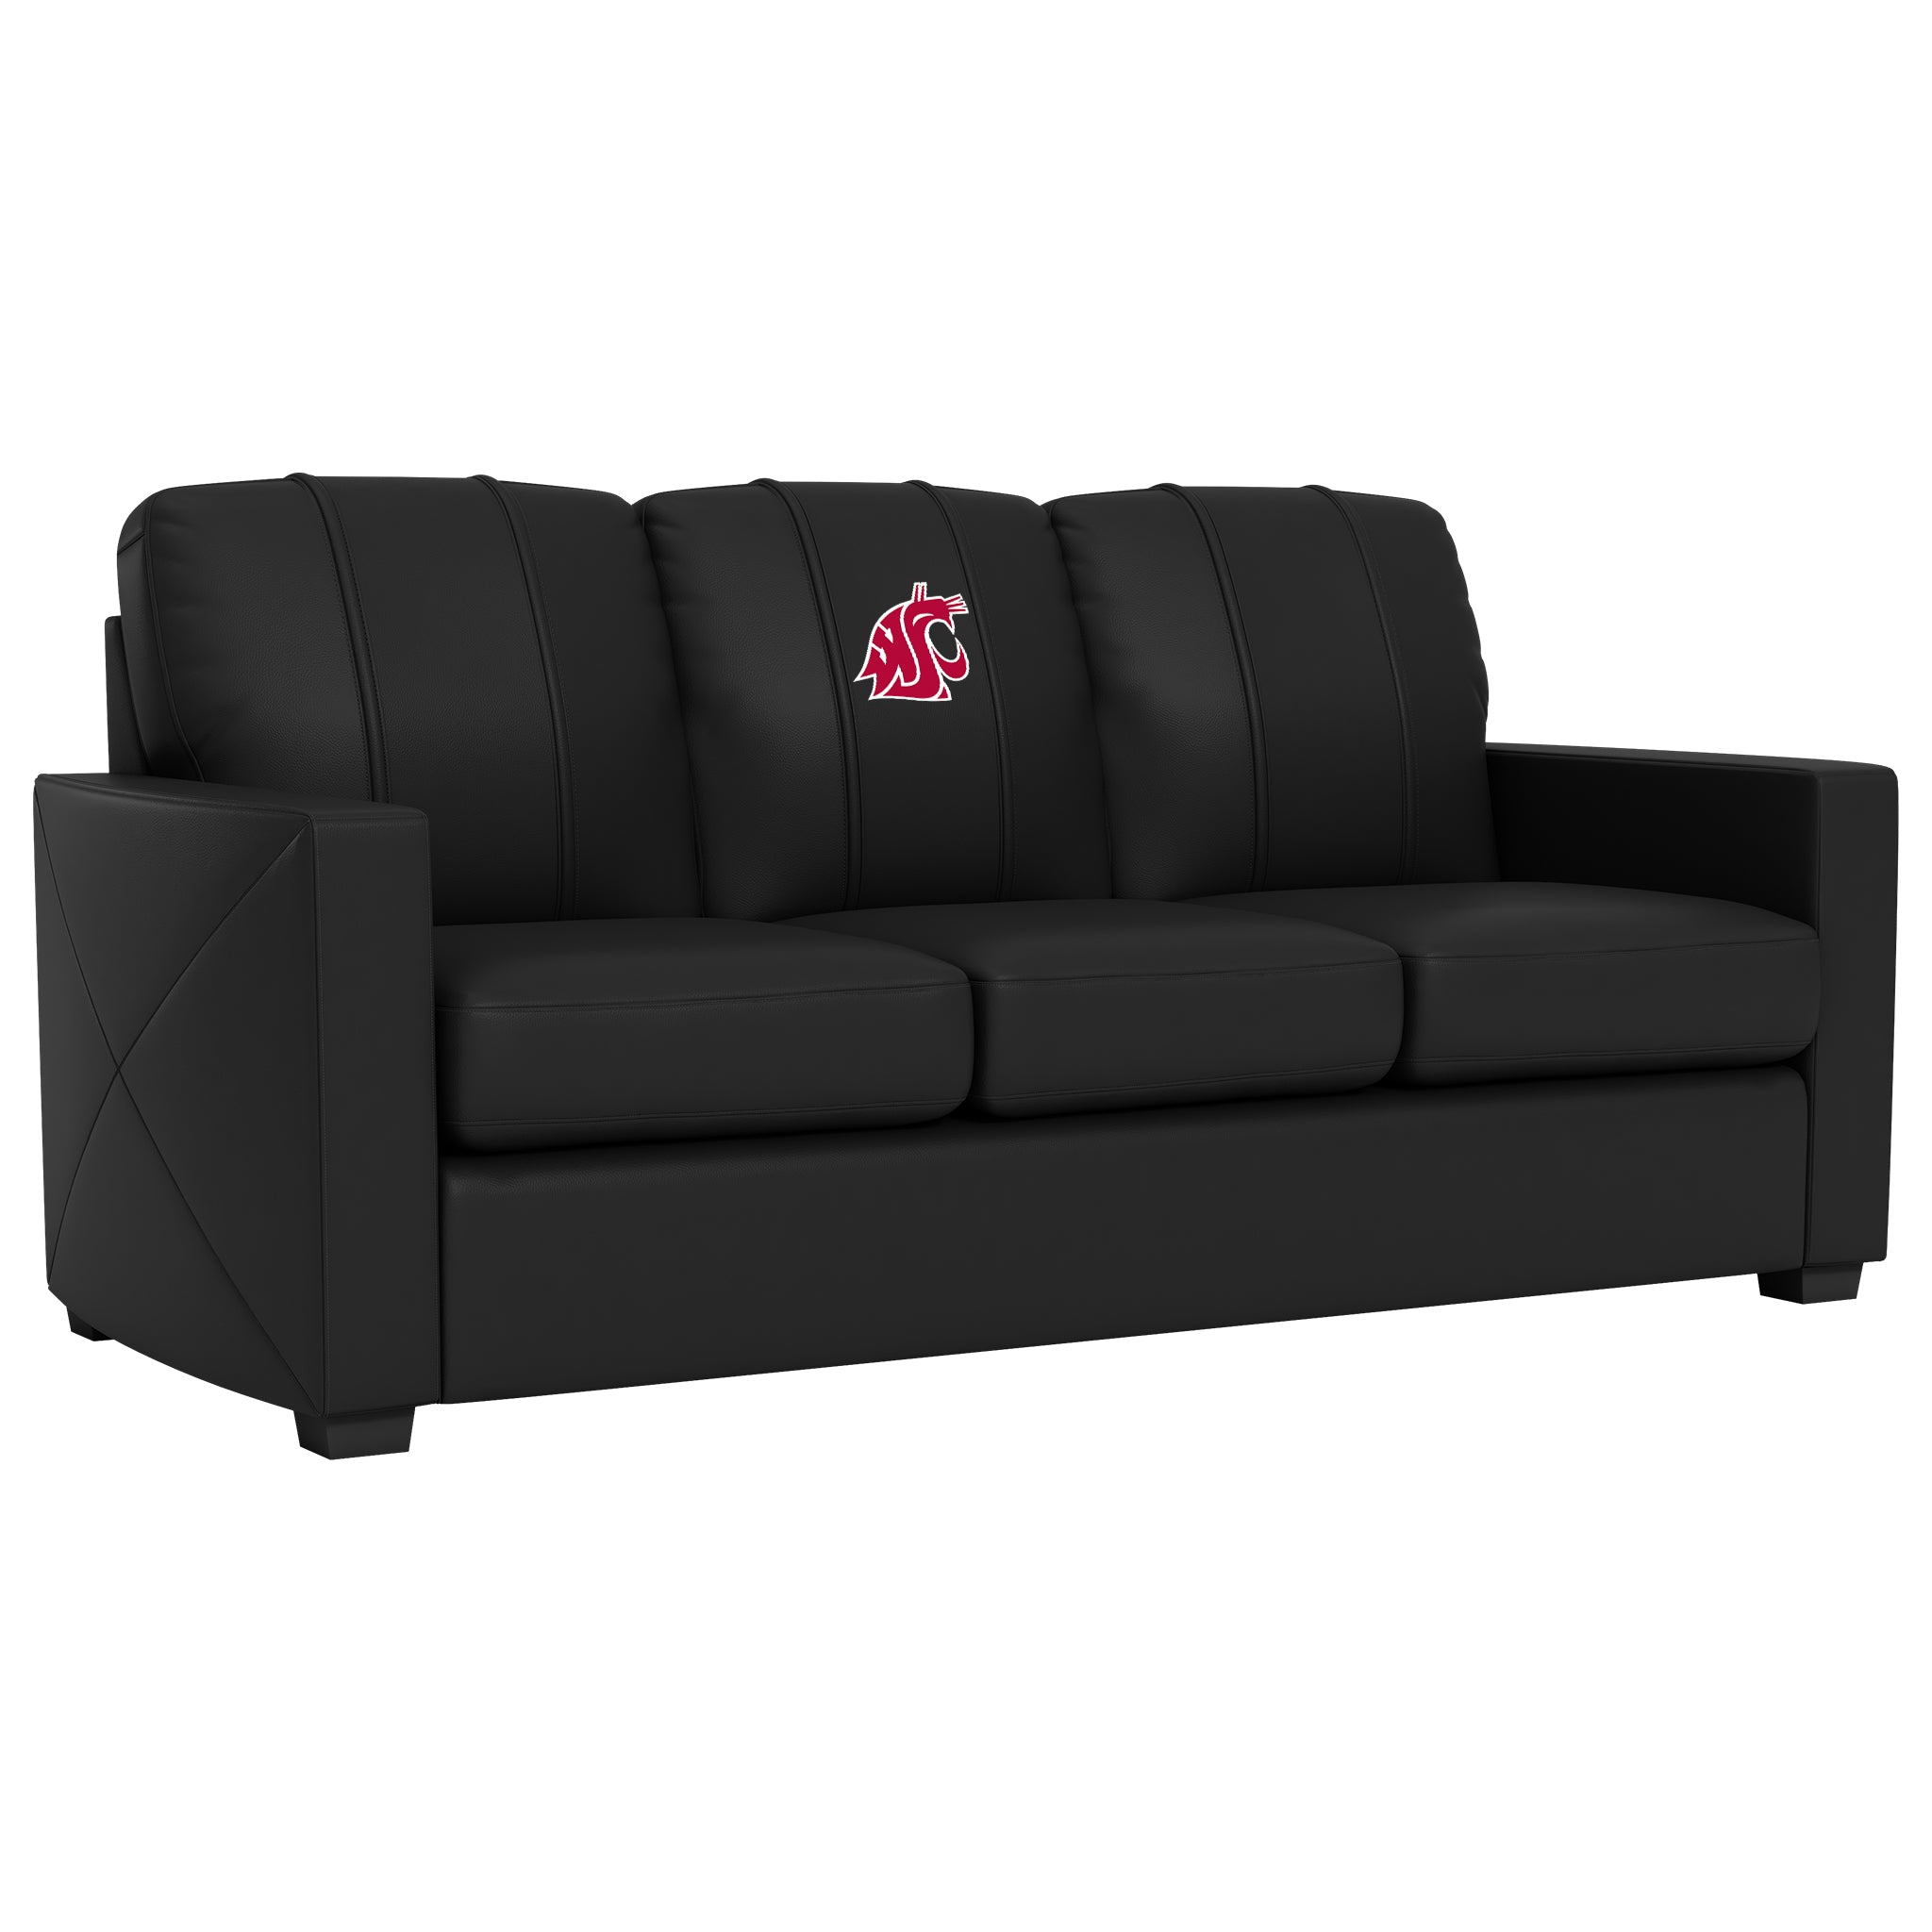 Washington State Cougars Silver Sofa with Washington State Cougars Logo